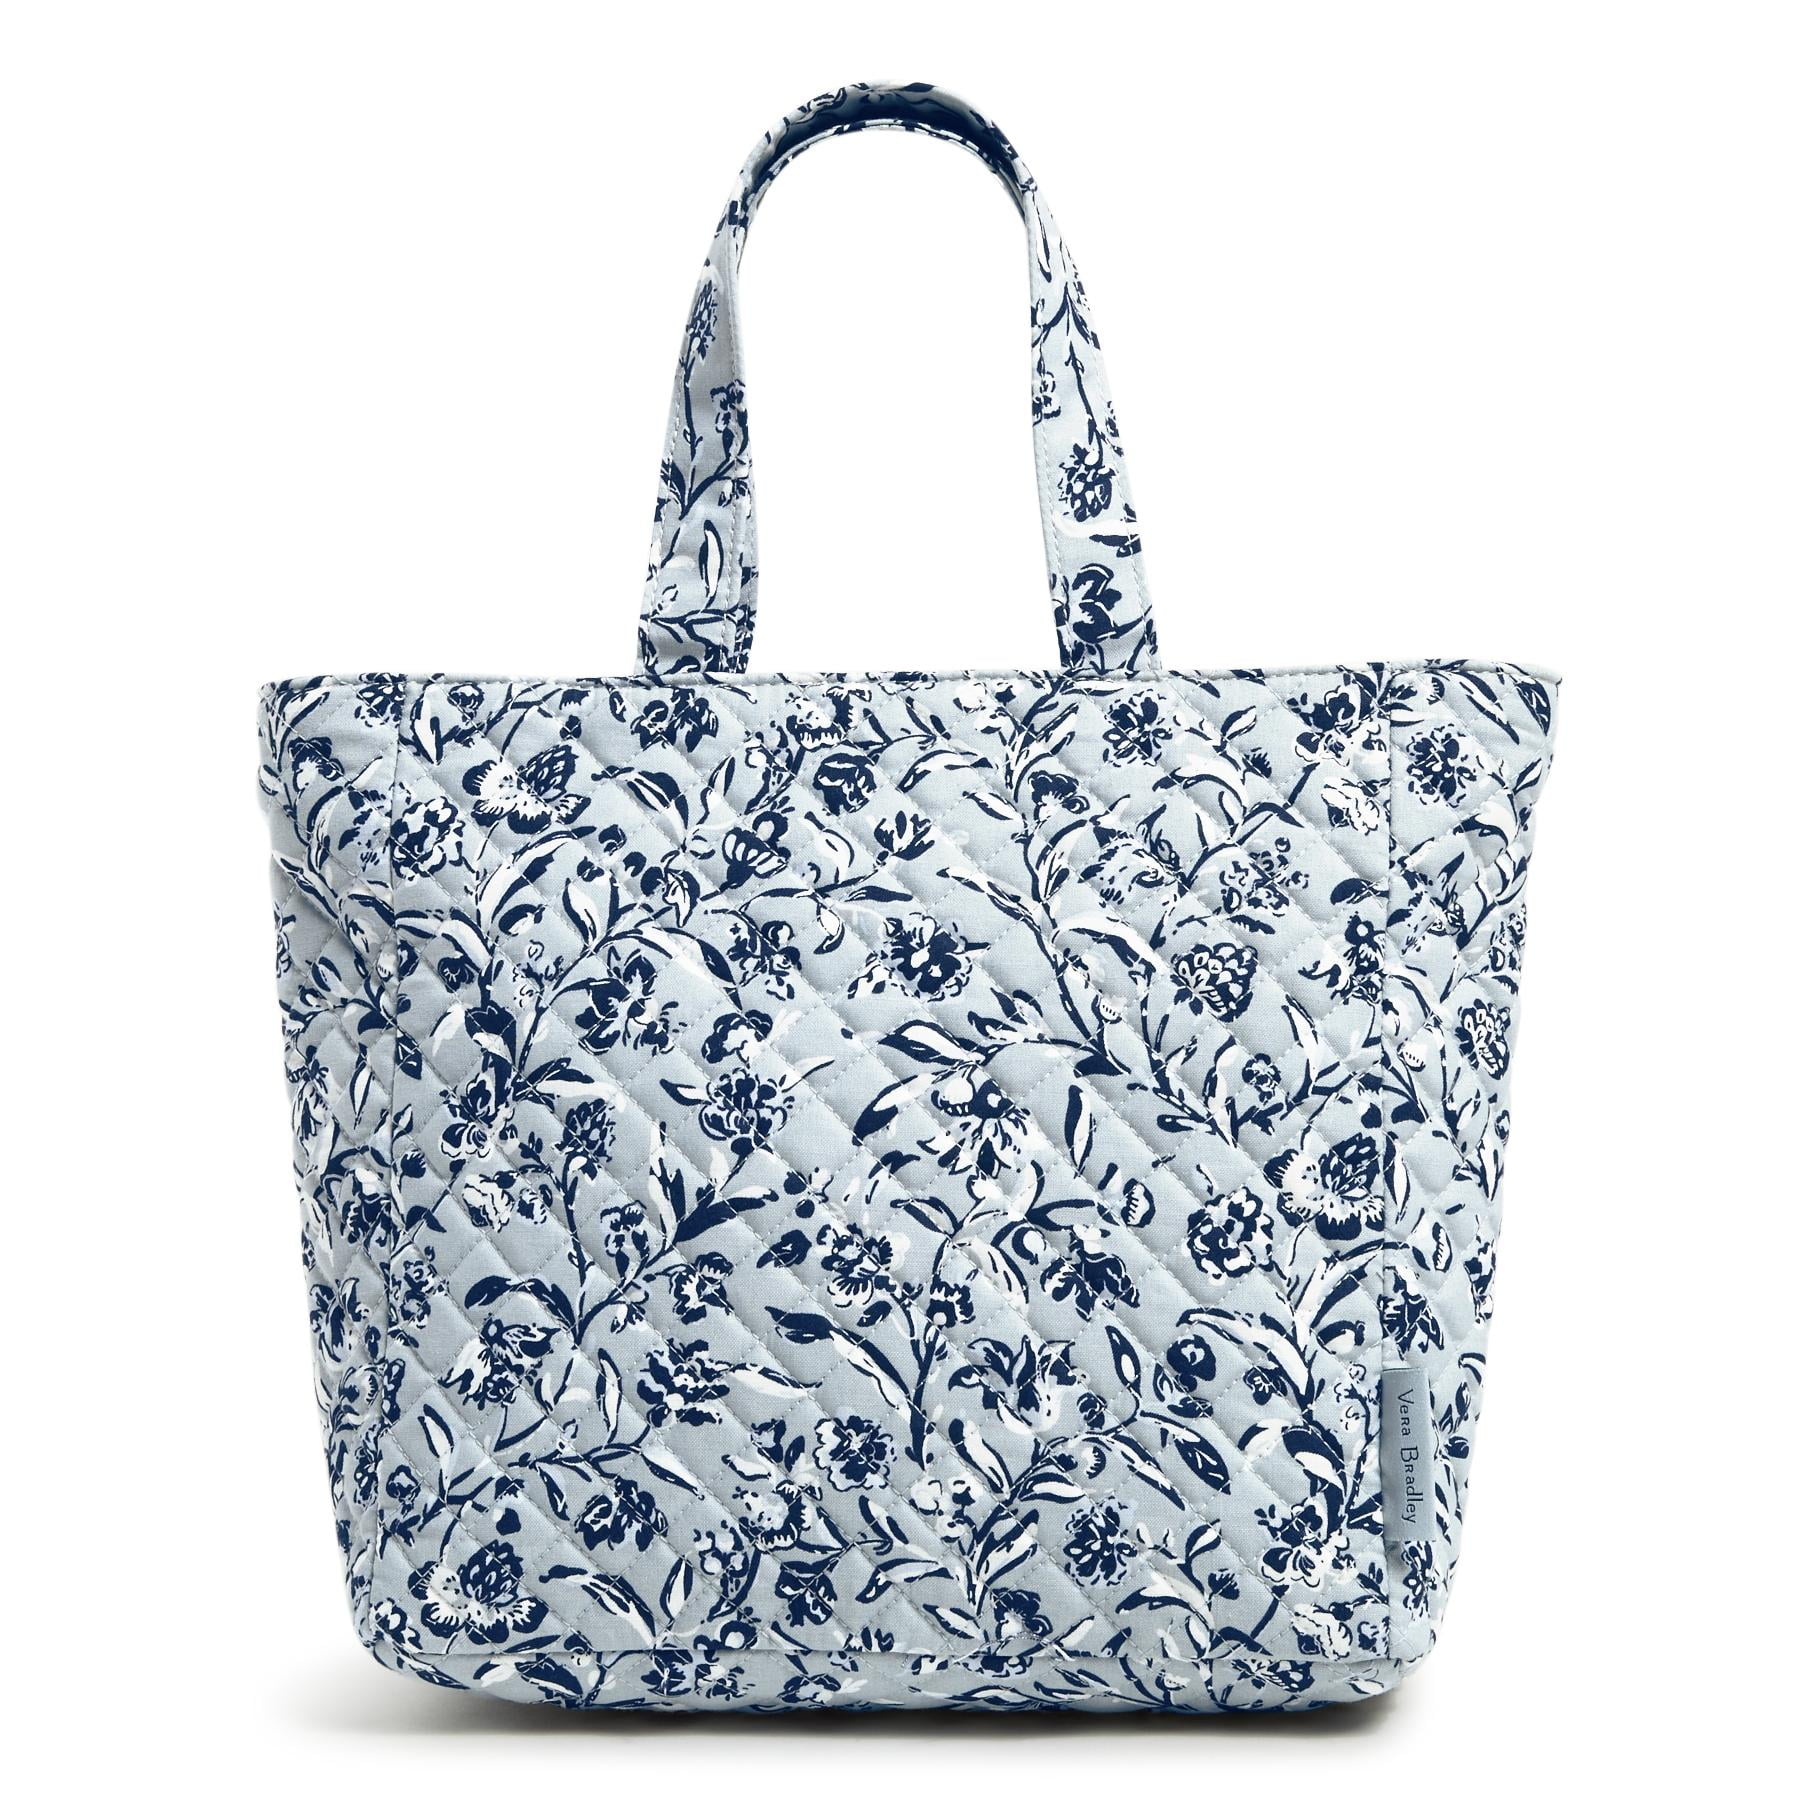 Vera Bradley Women's Recycled Cotton Lunch Tote Bag Perennials Gray ...